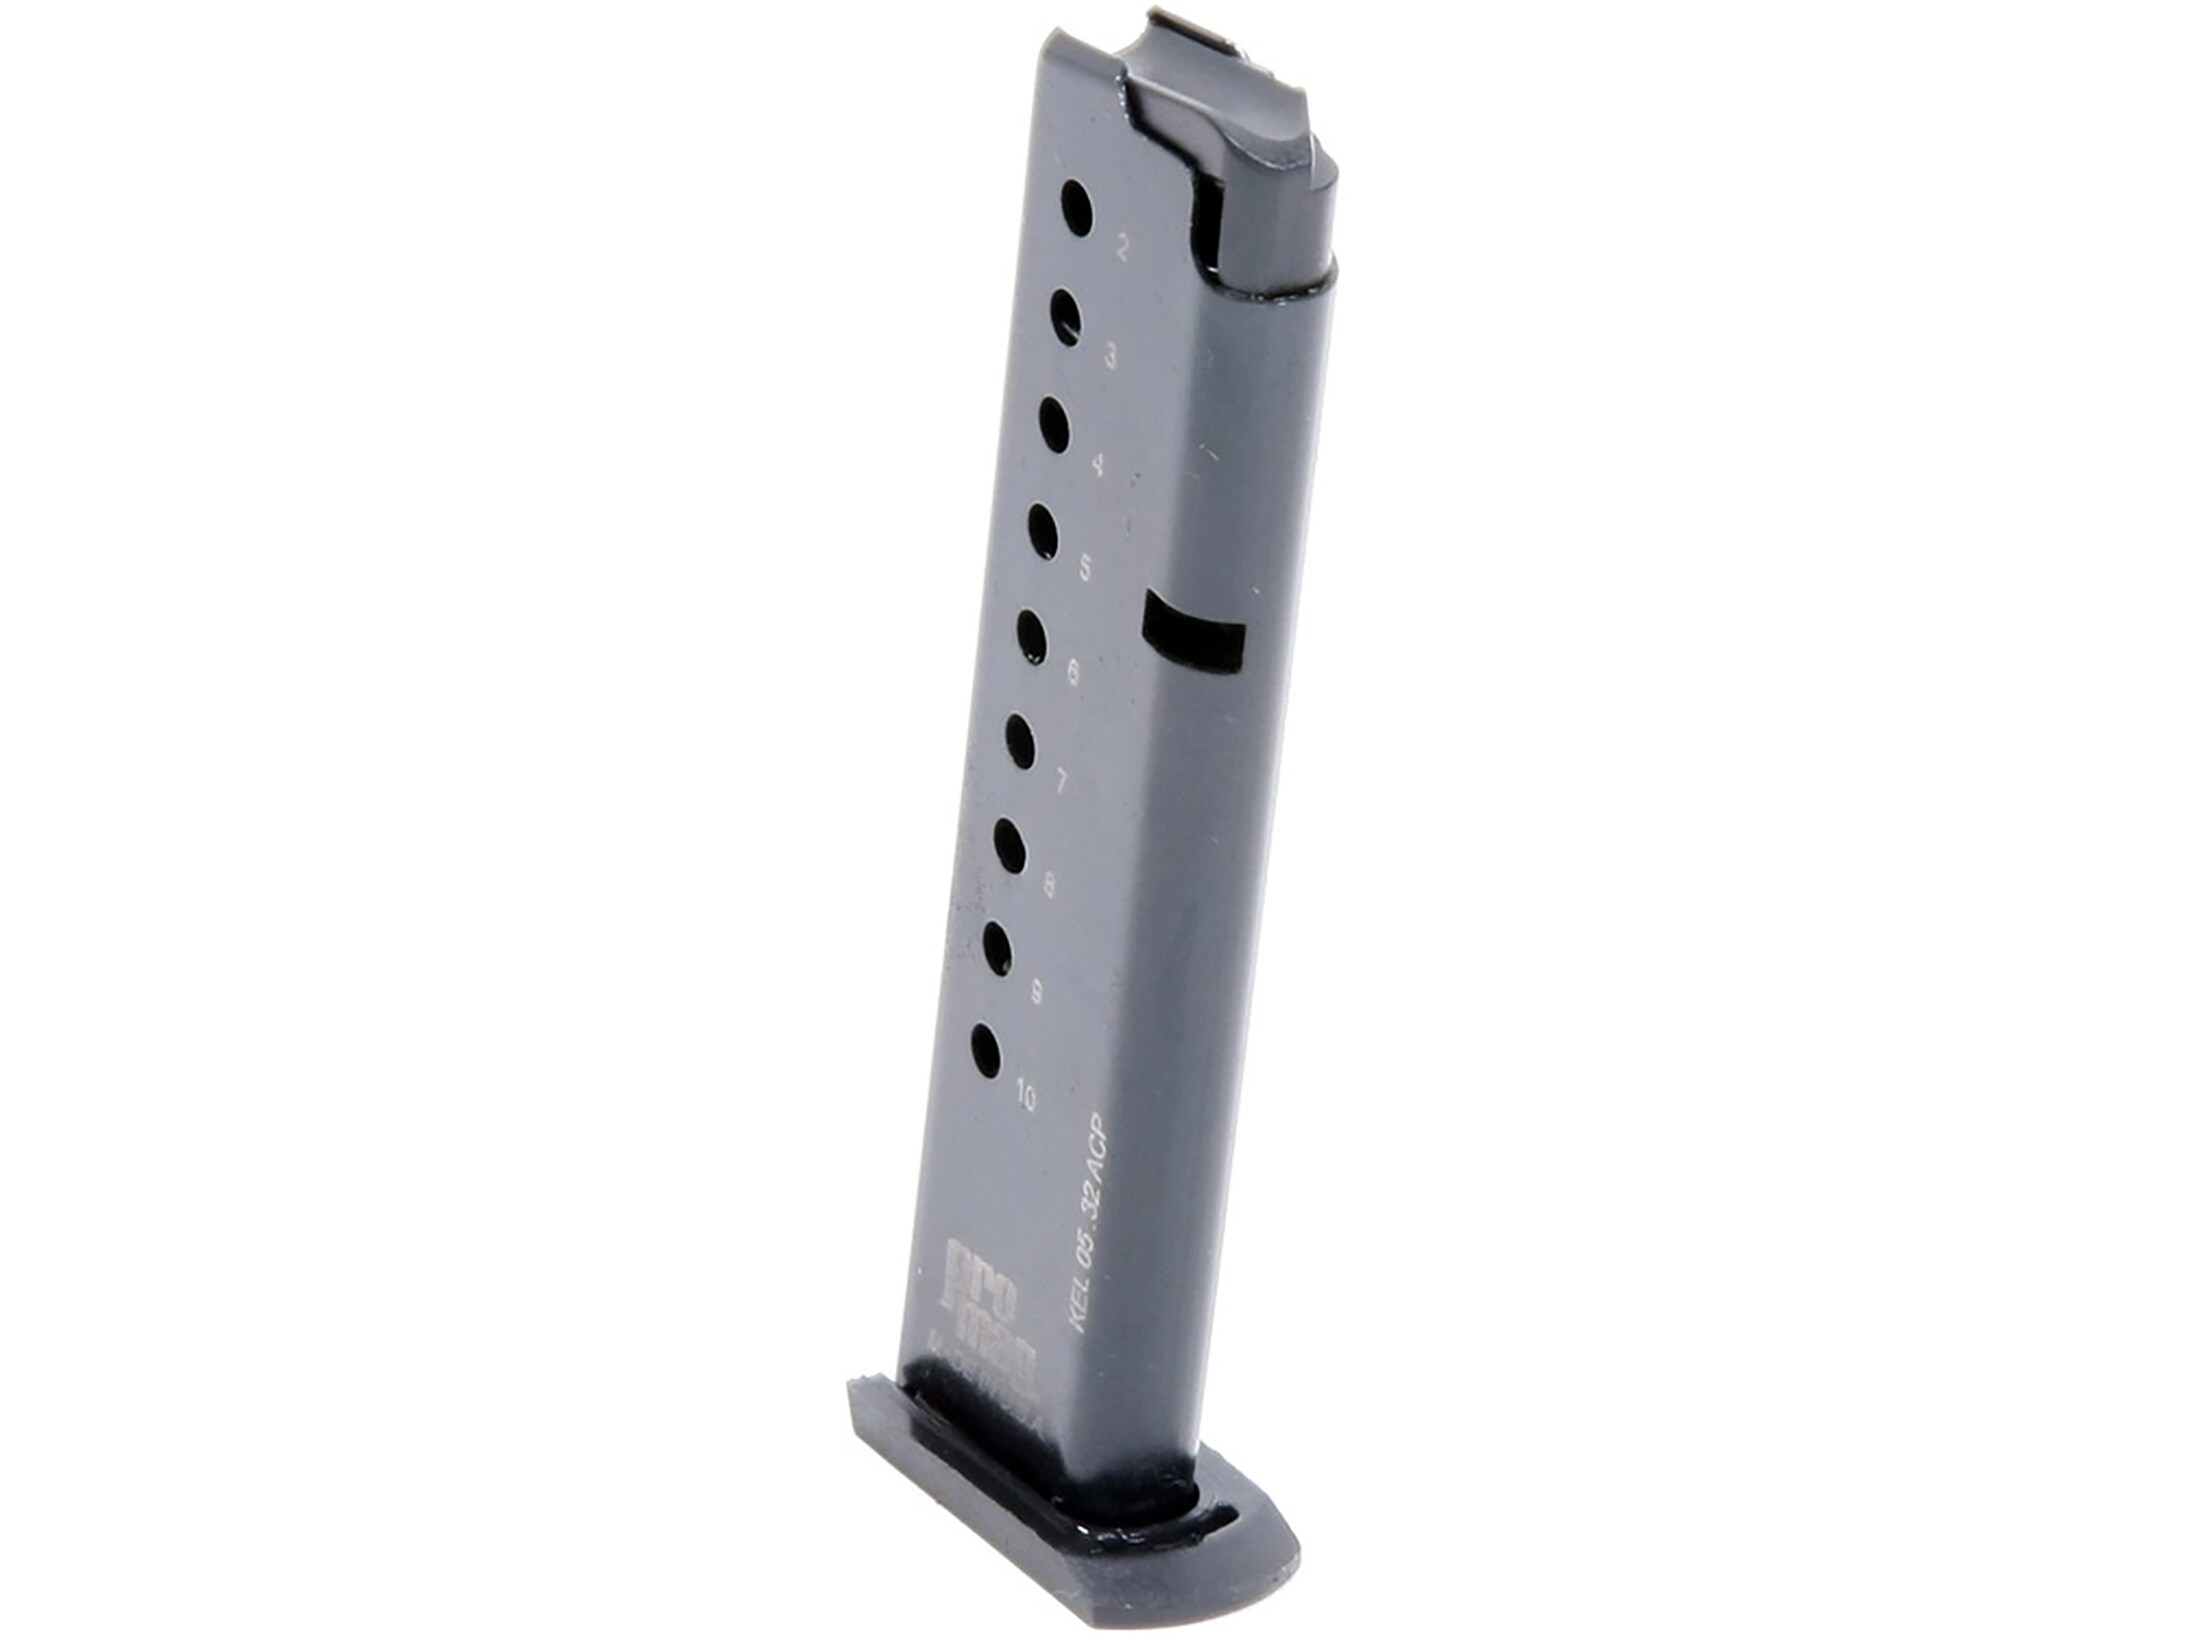 10 Round Capacity Details about   Cz 32 acp Mag 